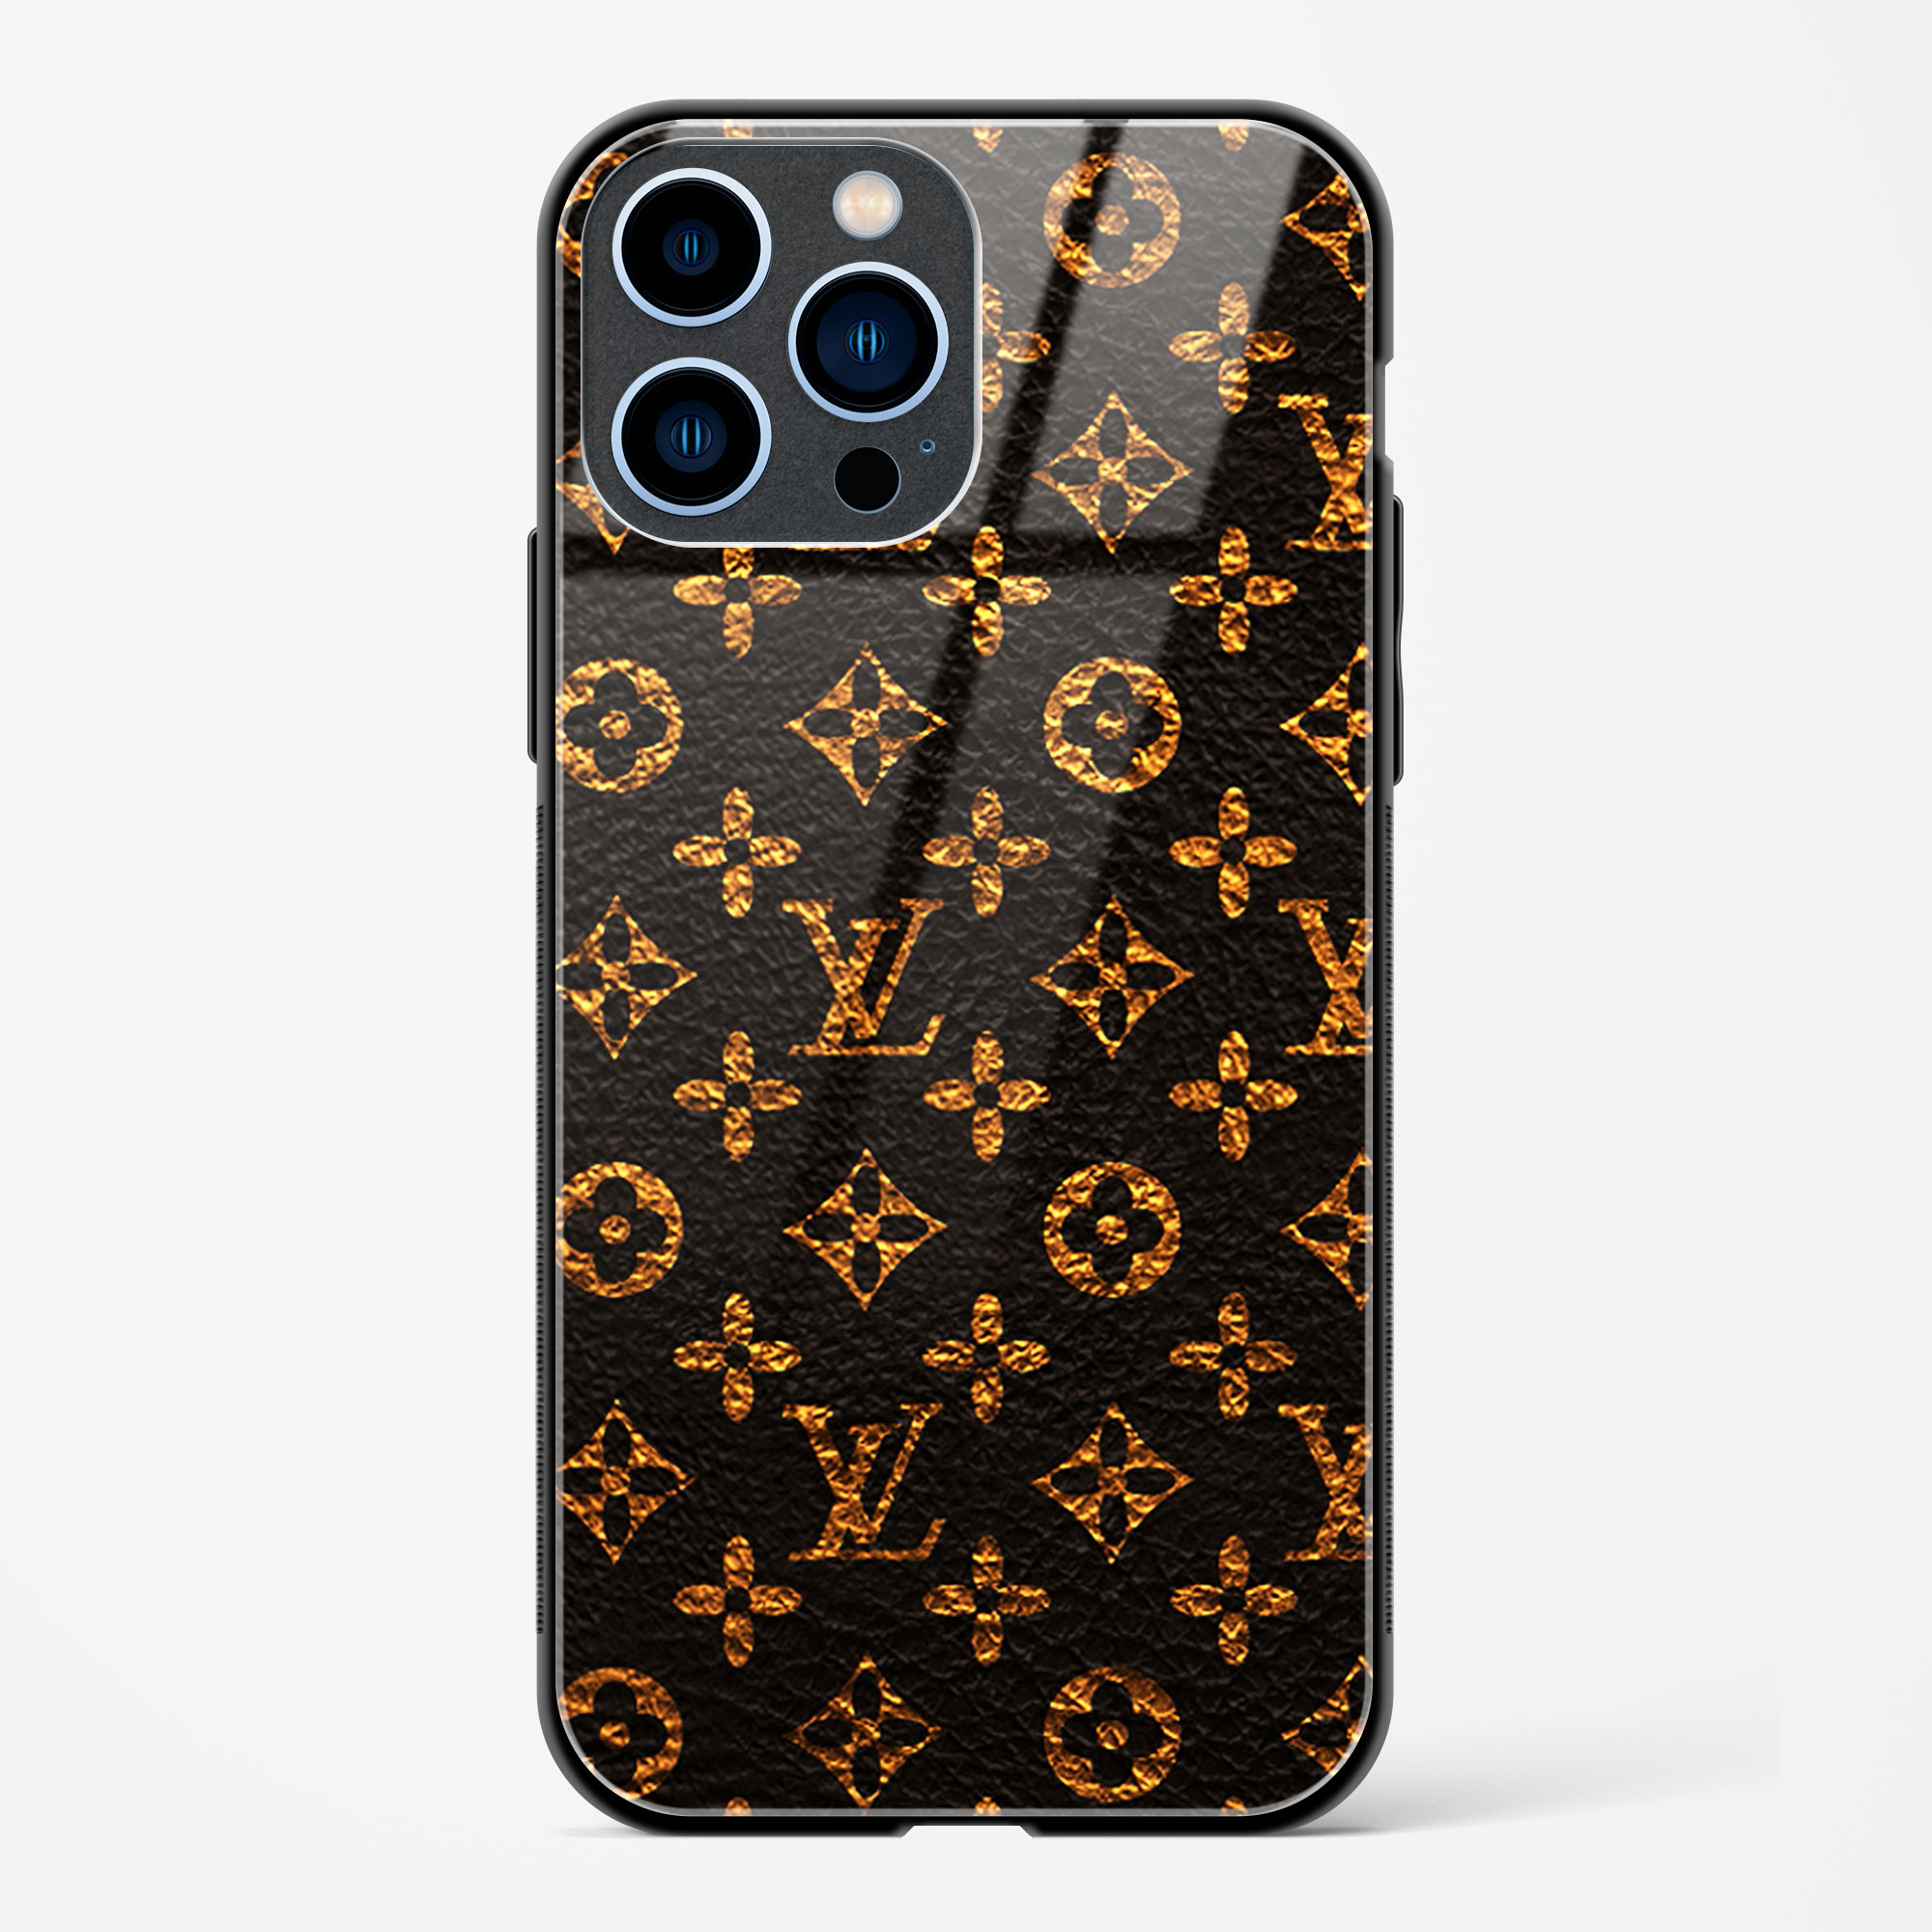 Case for iPhone 13 Pro Max - Louis Vuitton Gold